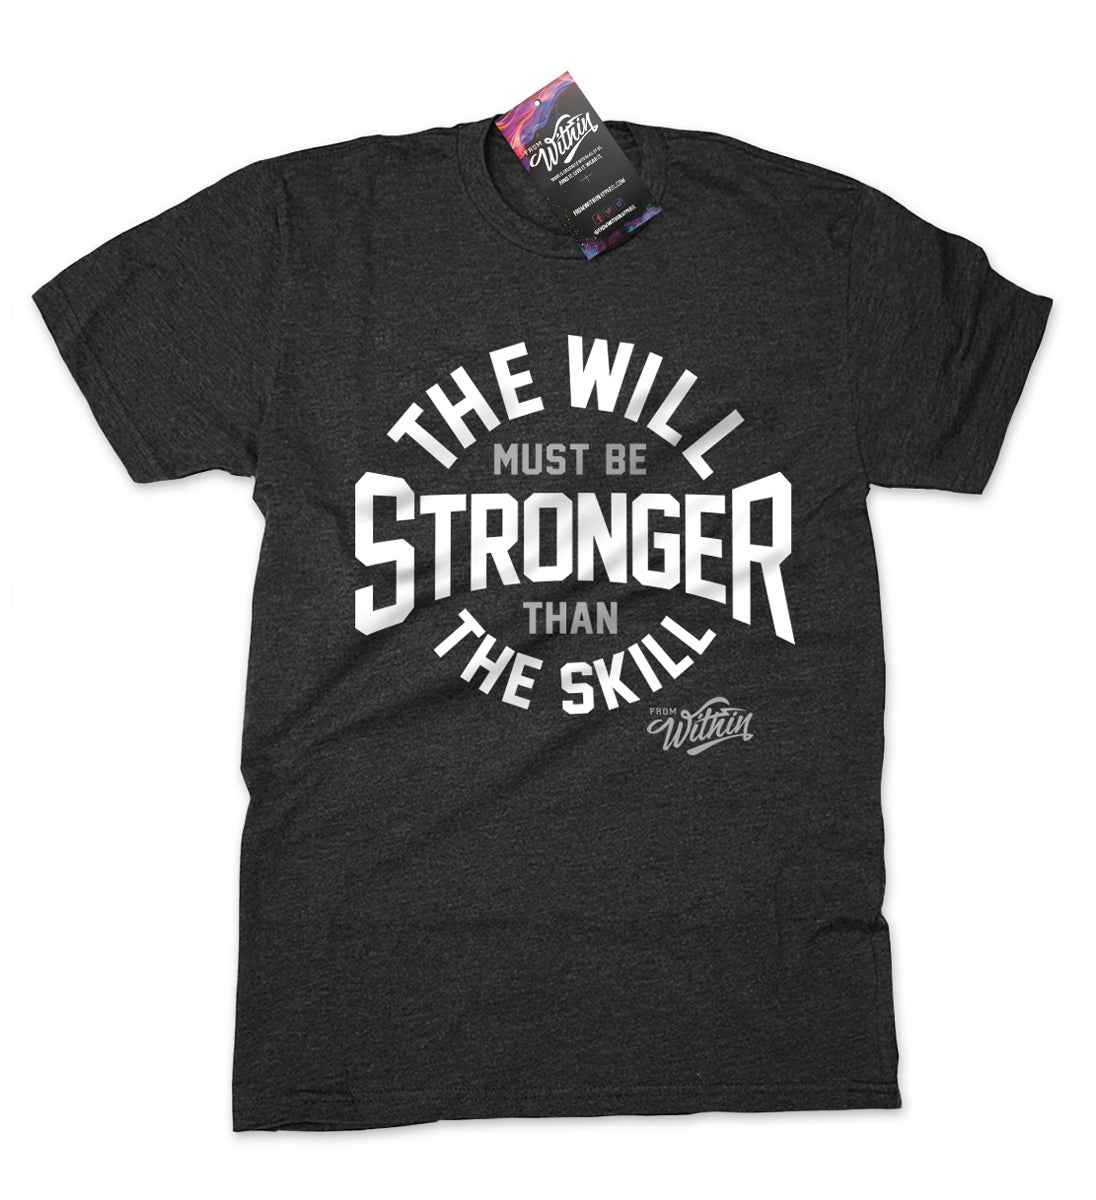 The Will Must Be Stronger Than The Skill T shirt